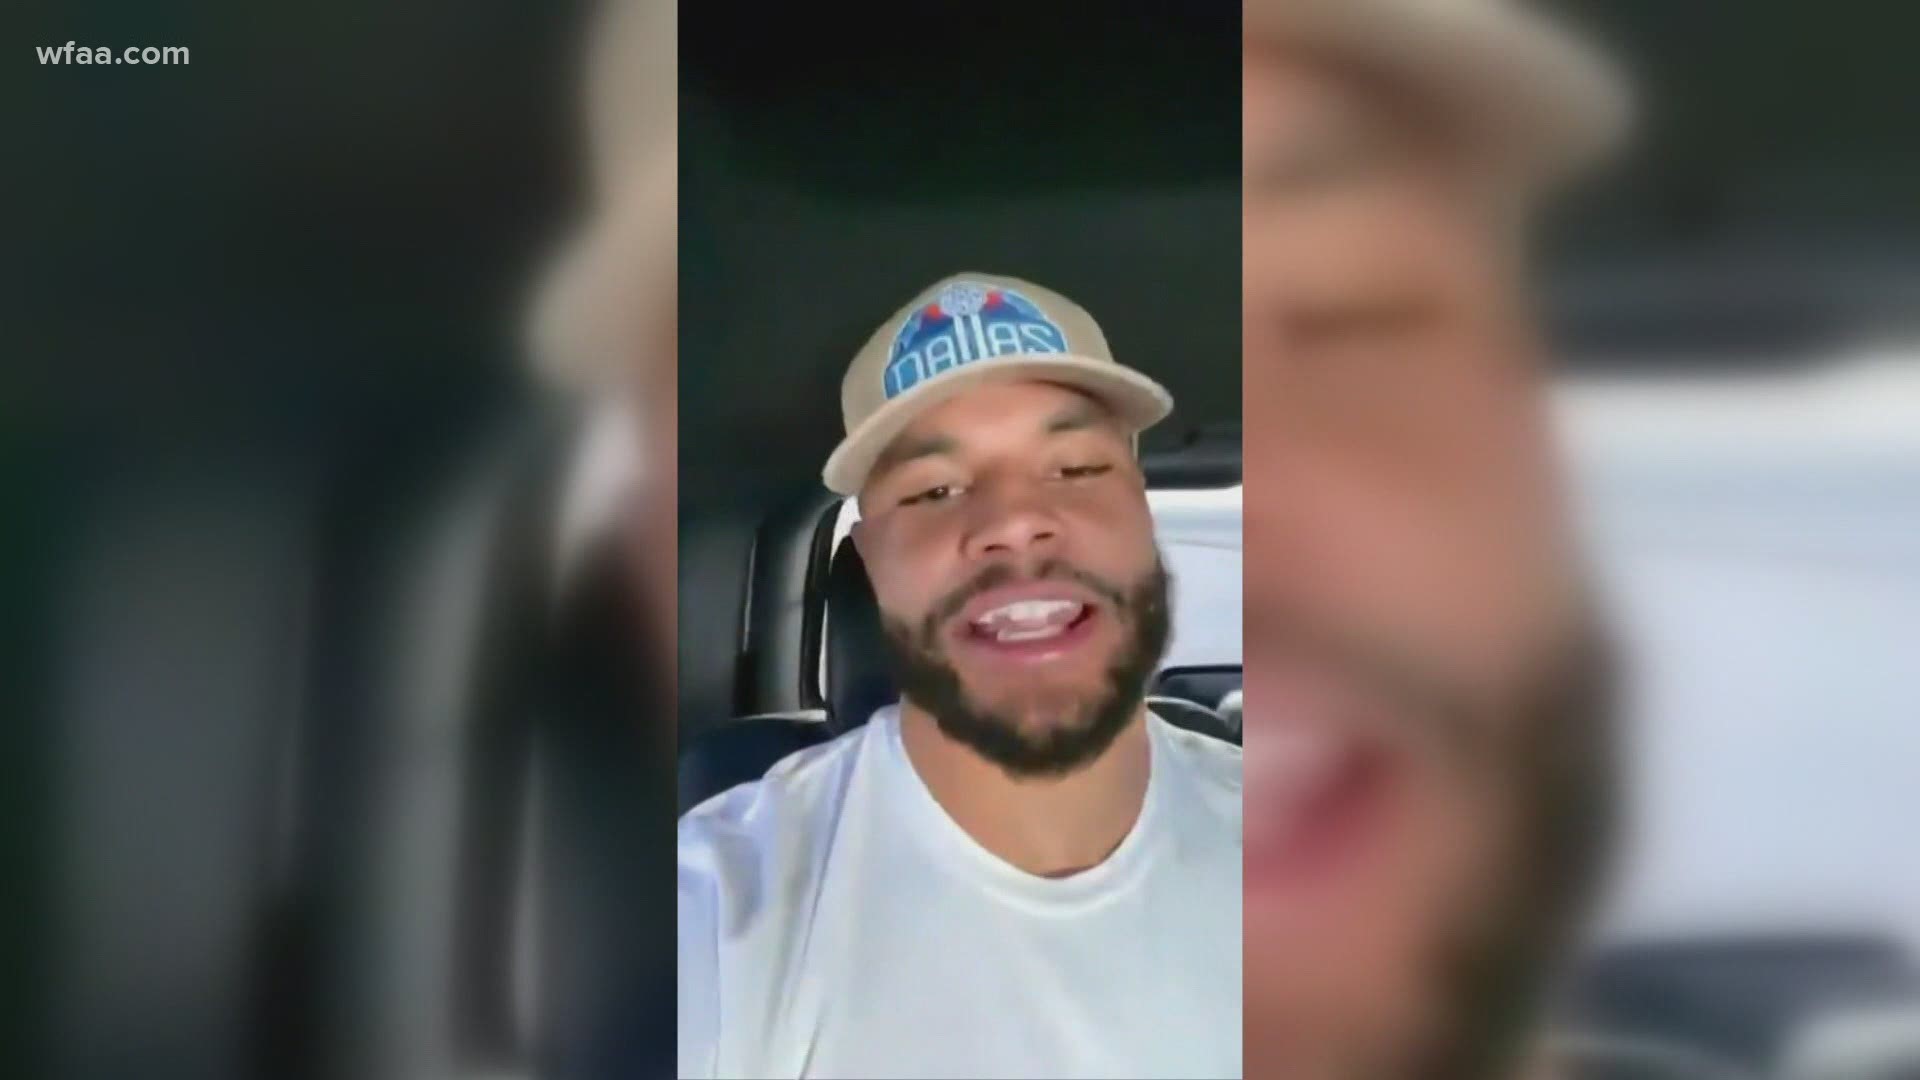 Dallas Cowboys quarterback Dak Prescott took his first step in the road to recovery on Thursday, according to a video he posted on Instagram.